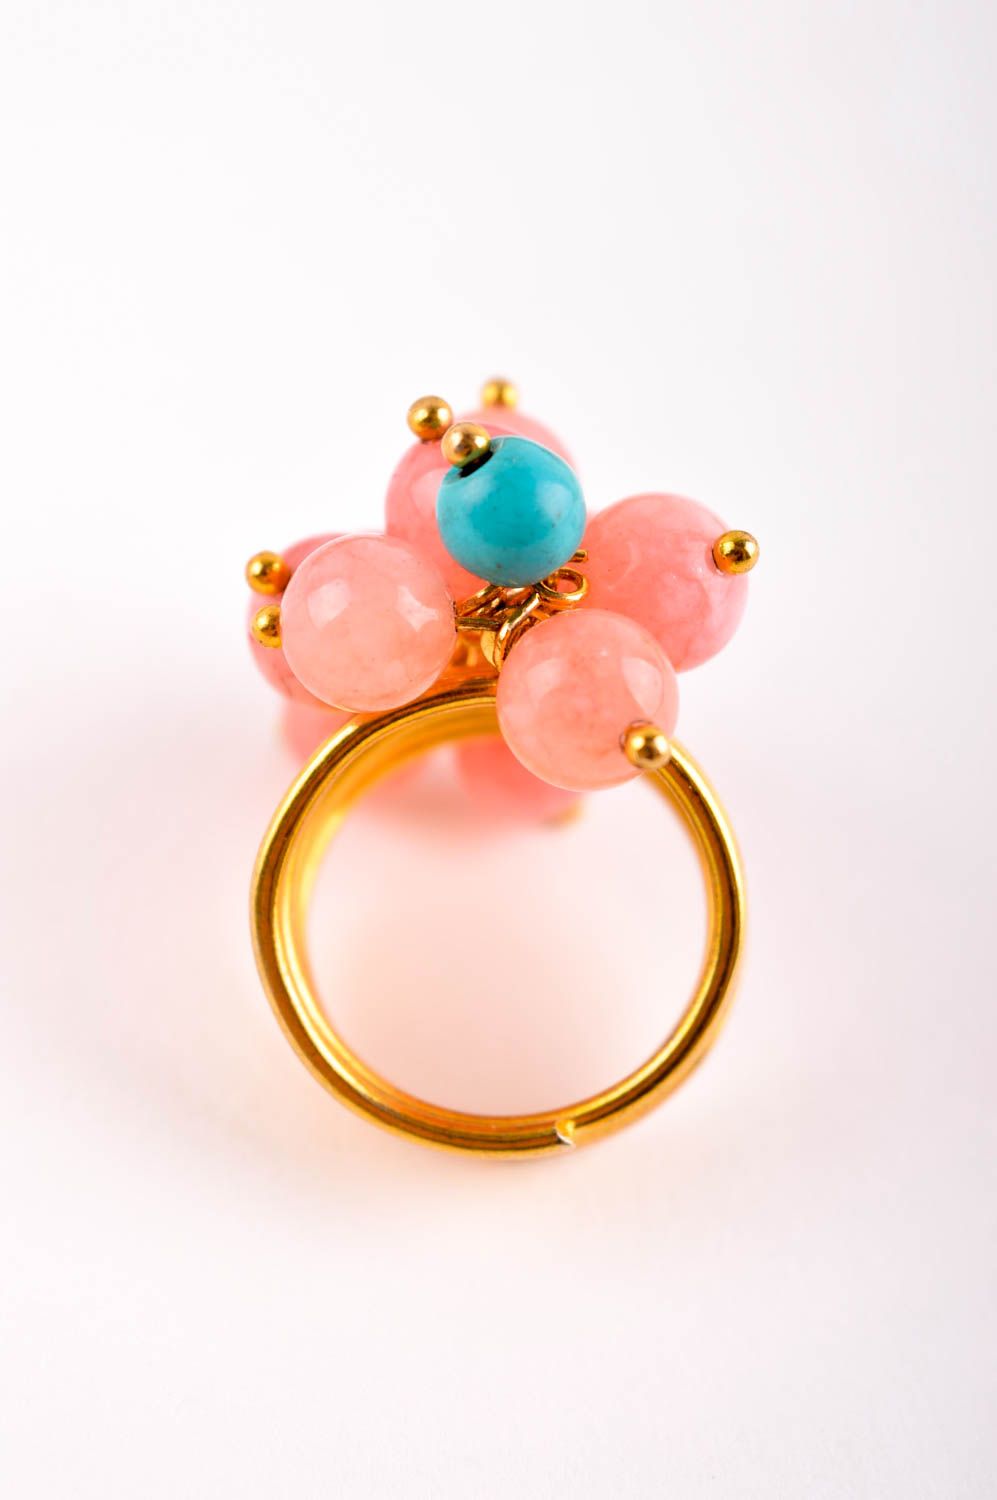 Handmade ring designer ring with stones unusual accessory gift for women photo 4